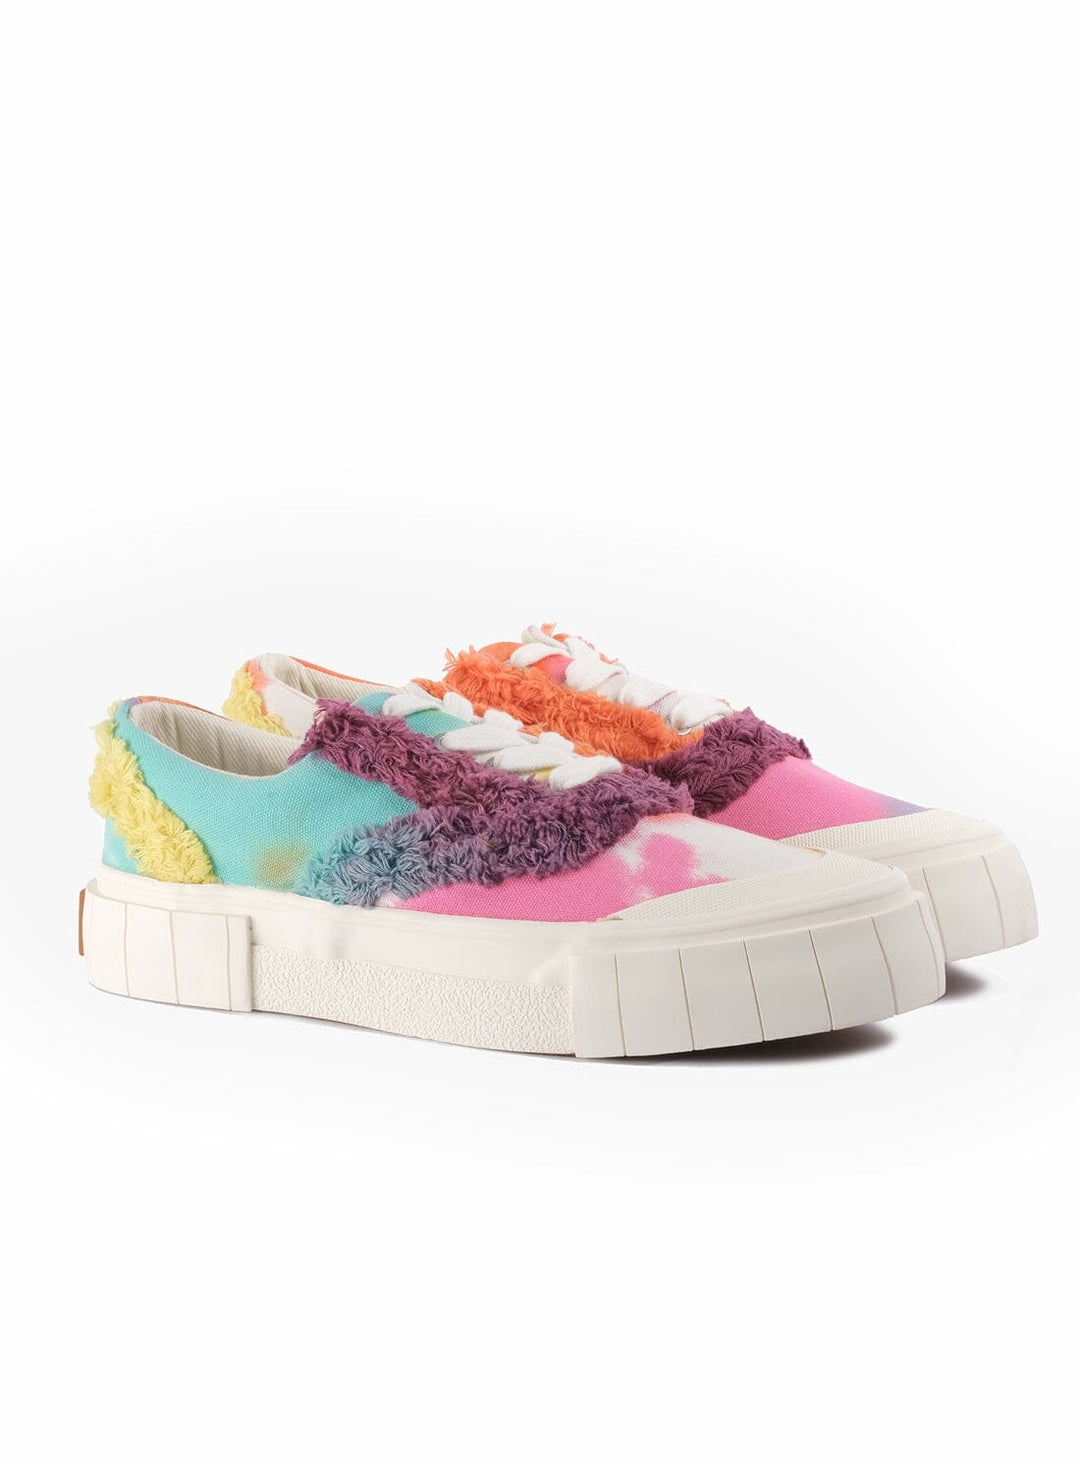 Opal Fringe Low Tops Trainers Shoes YBDFinds 